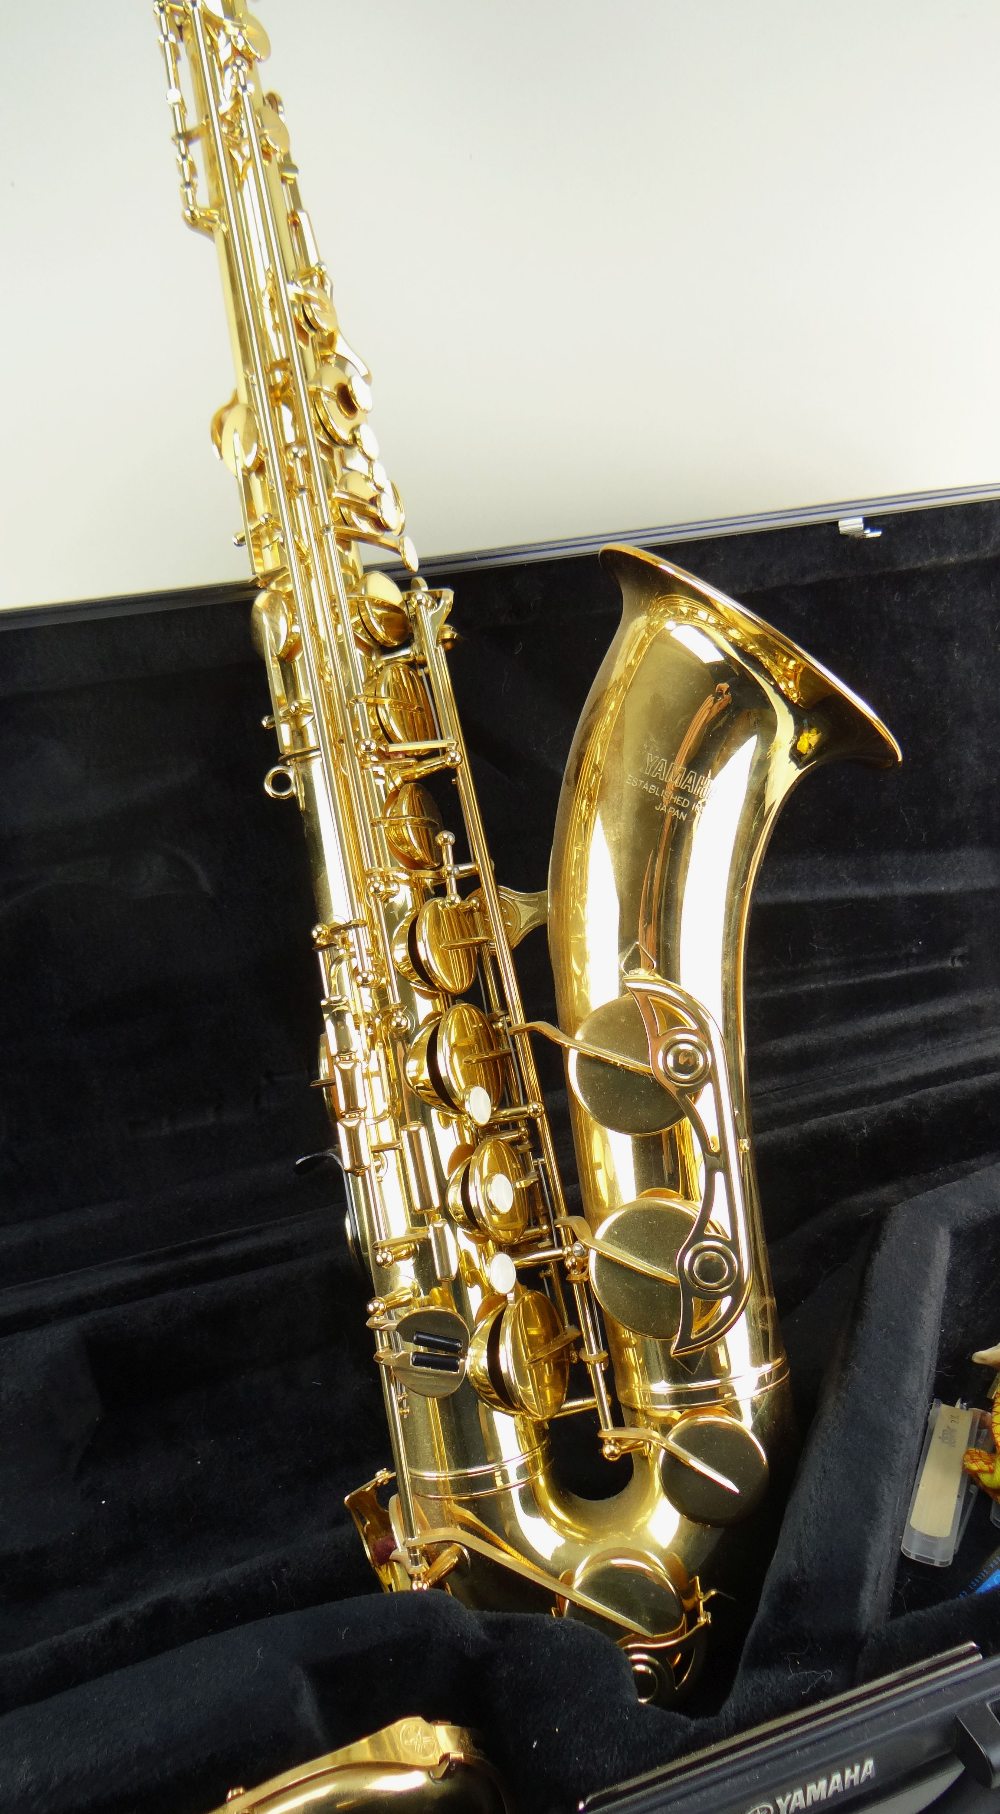 YAMAHA YTS-275 TENOR SAXOPHONE, ser. no. 01xx1, Condition: very good to excellent, offered with - Image 2 of 2